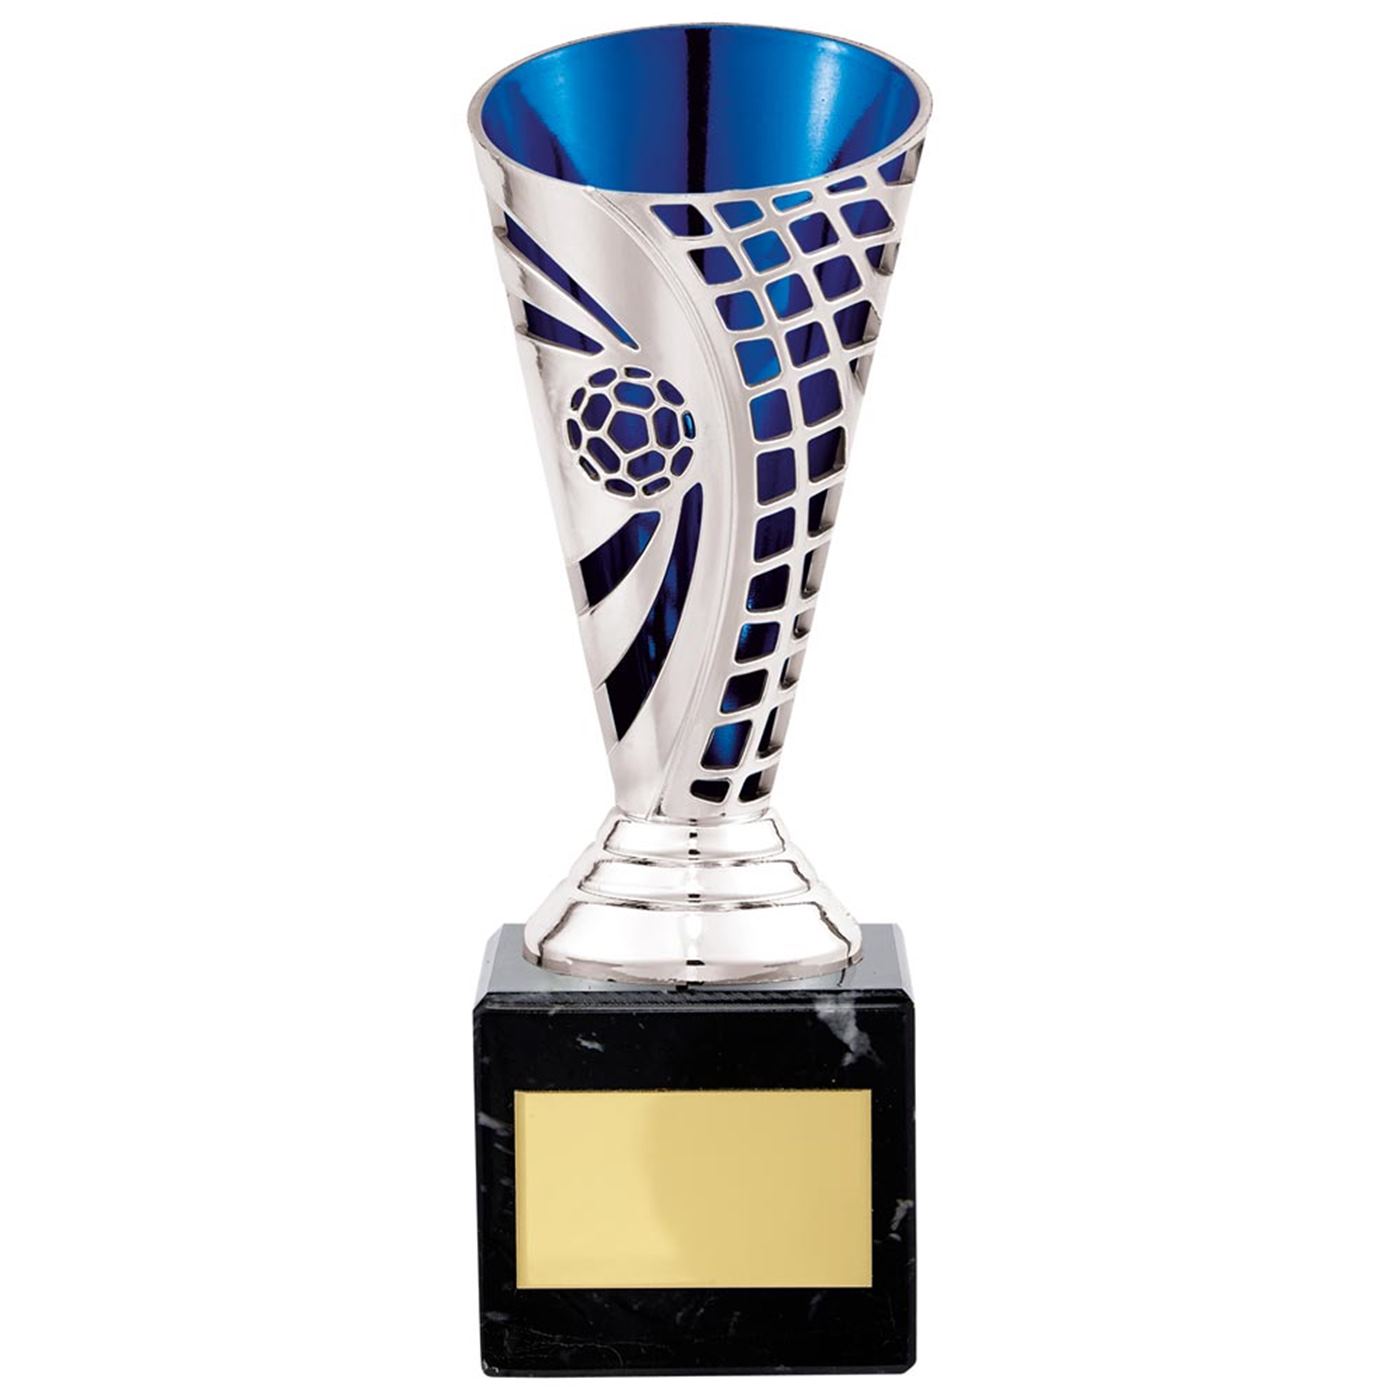 Football Series Defender Trophy Cup In Silver & Blue